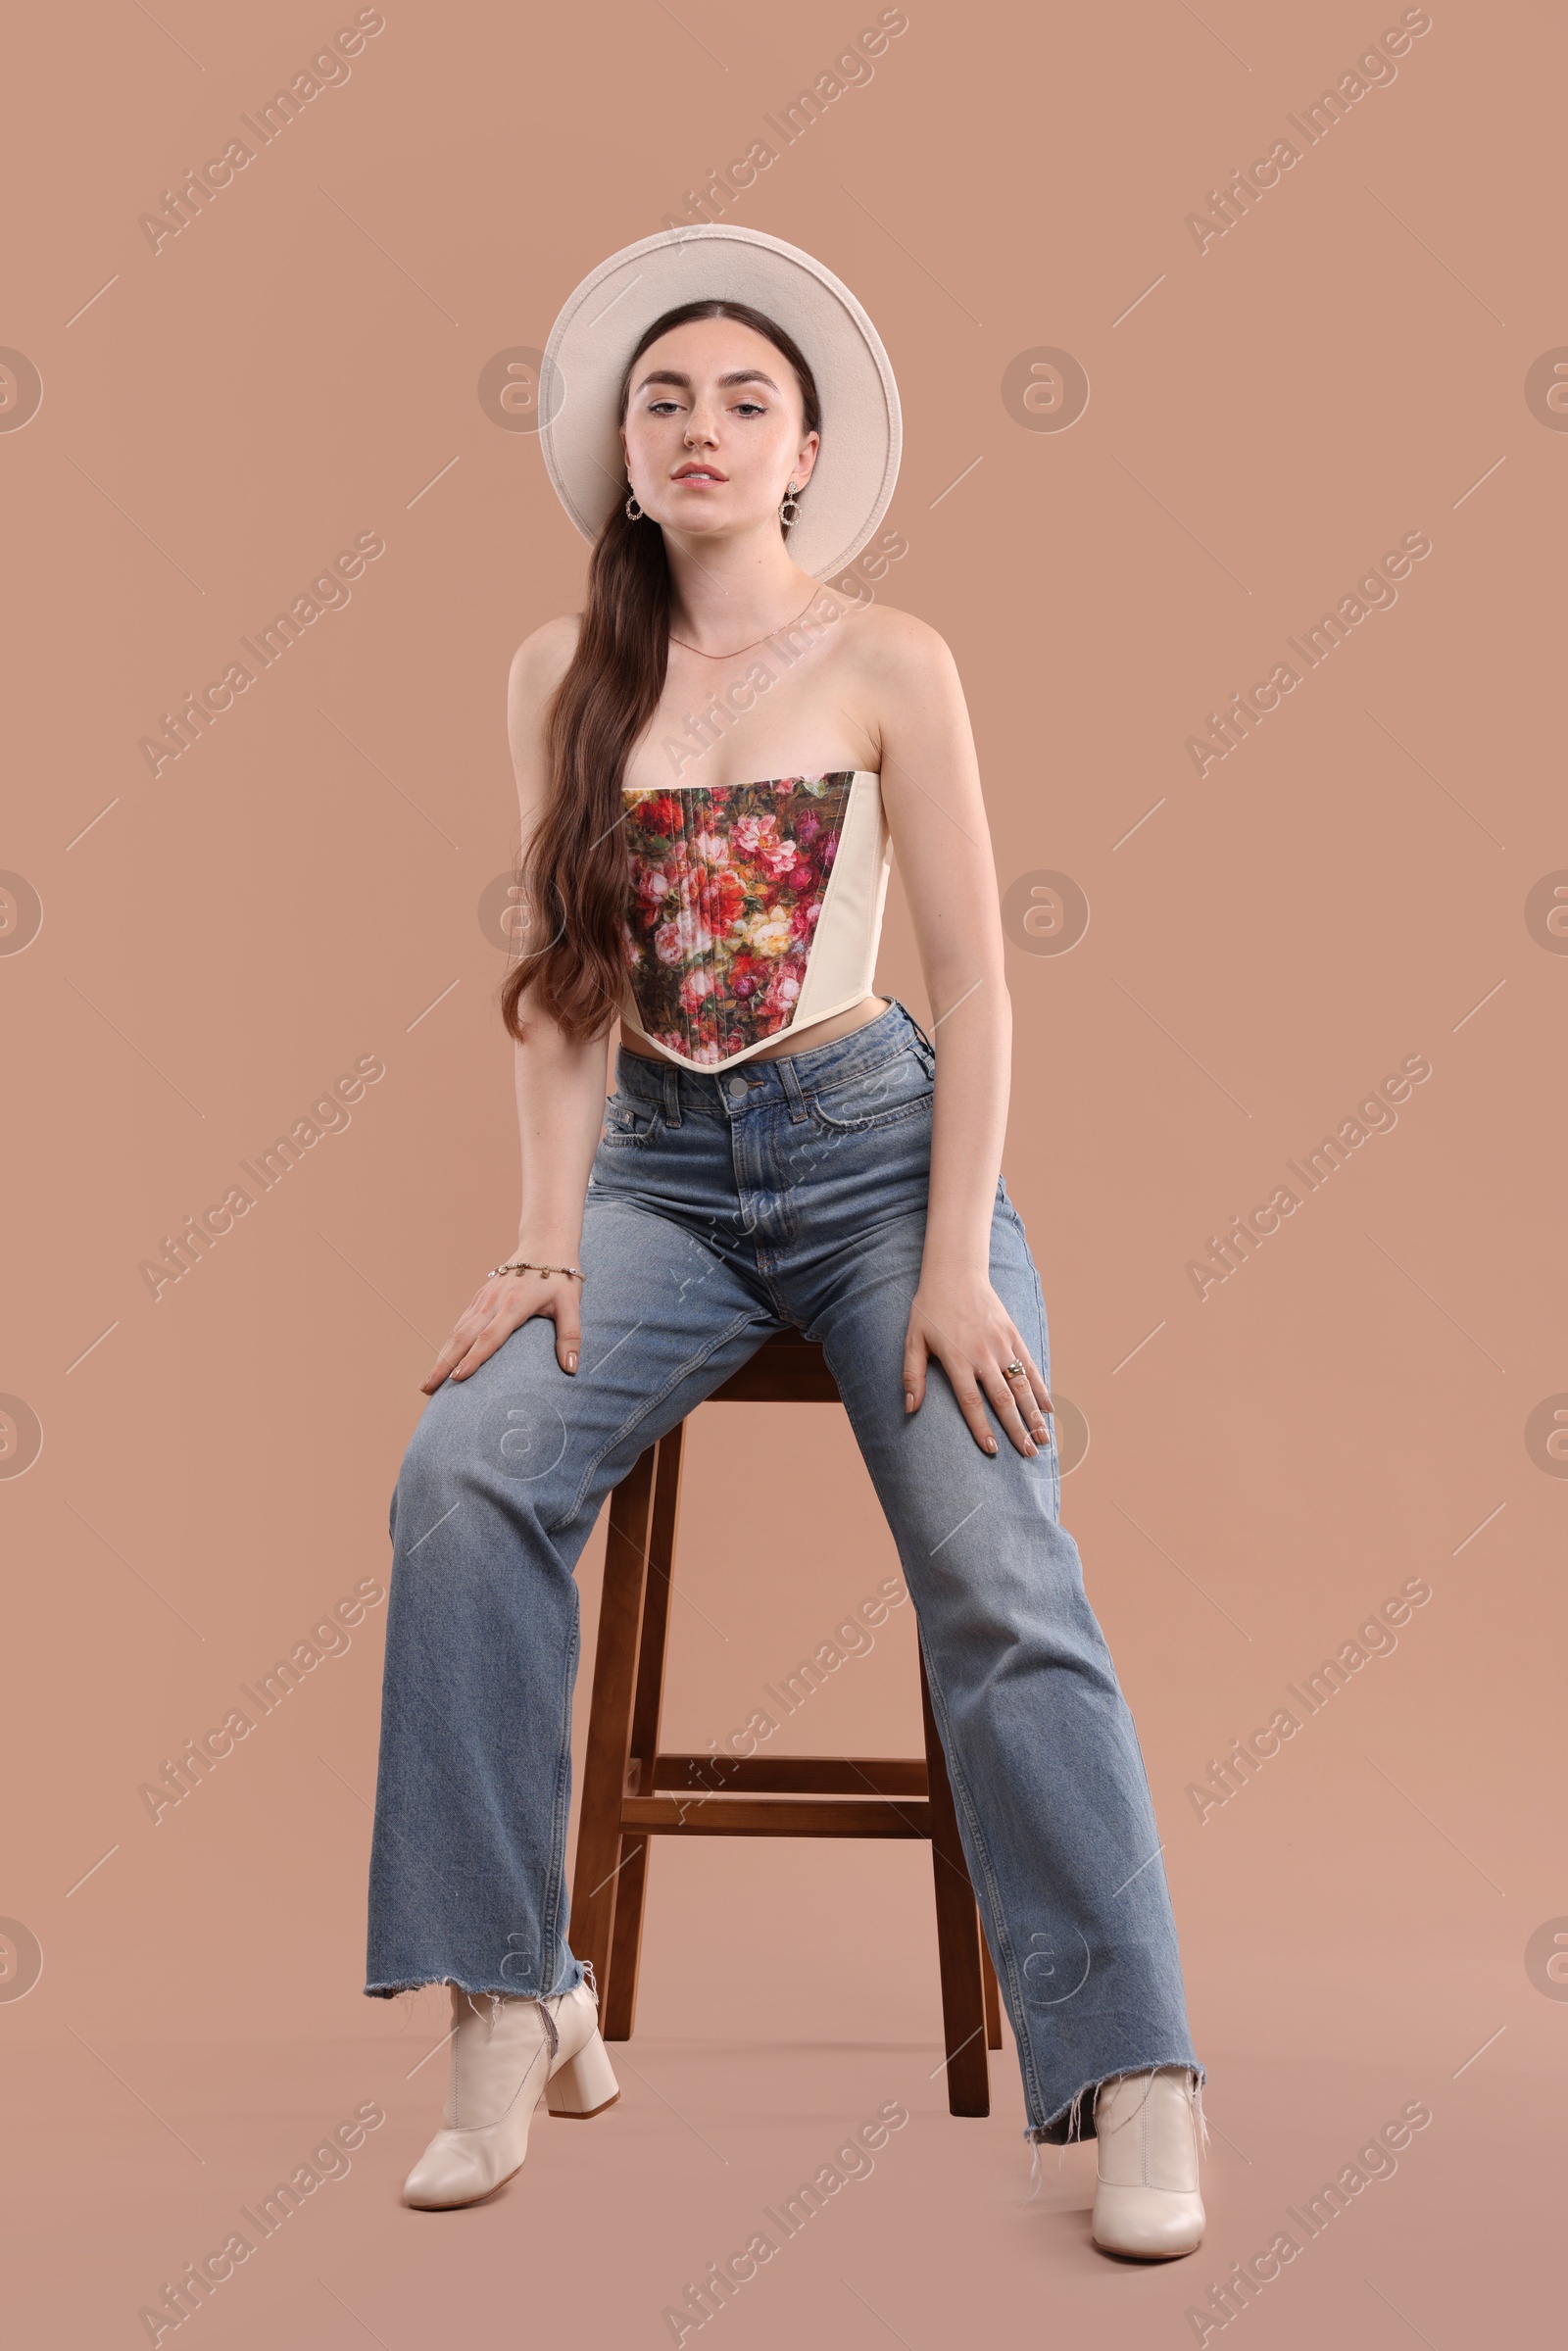 Photo of Beautiful woman in stylish corset and hat posing on stool against beige background